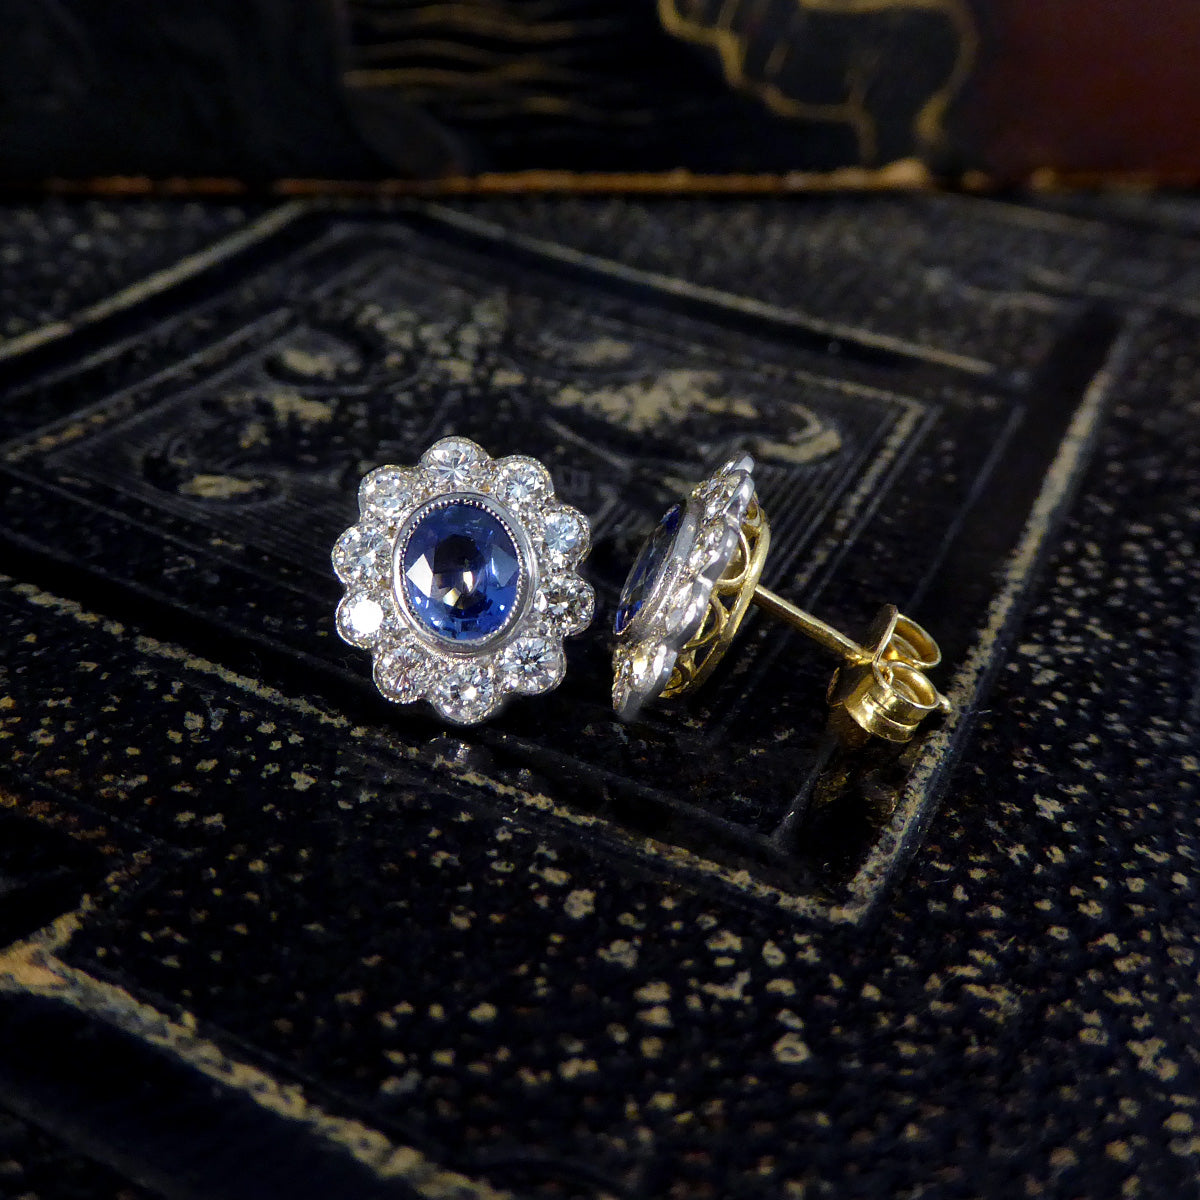 Edwardian Inspired Sapphire and Diamond Cluster Earrings in 18ct Gold